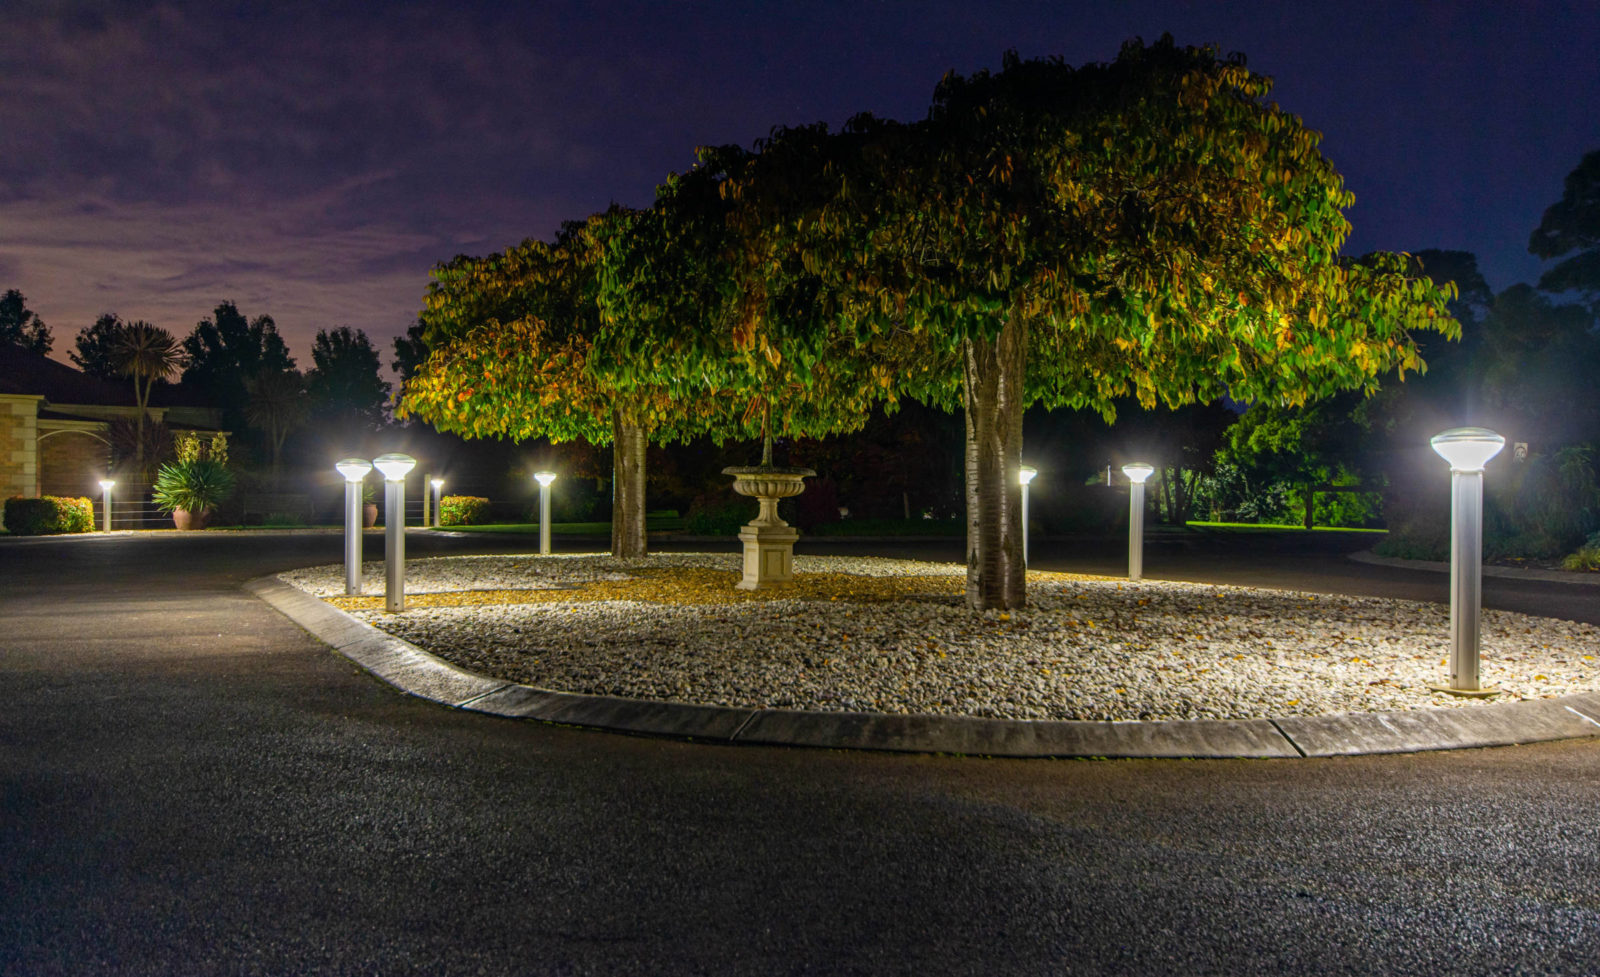 Solar Bollards lit up in a private turn-around driveway.